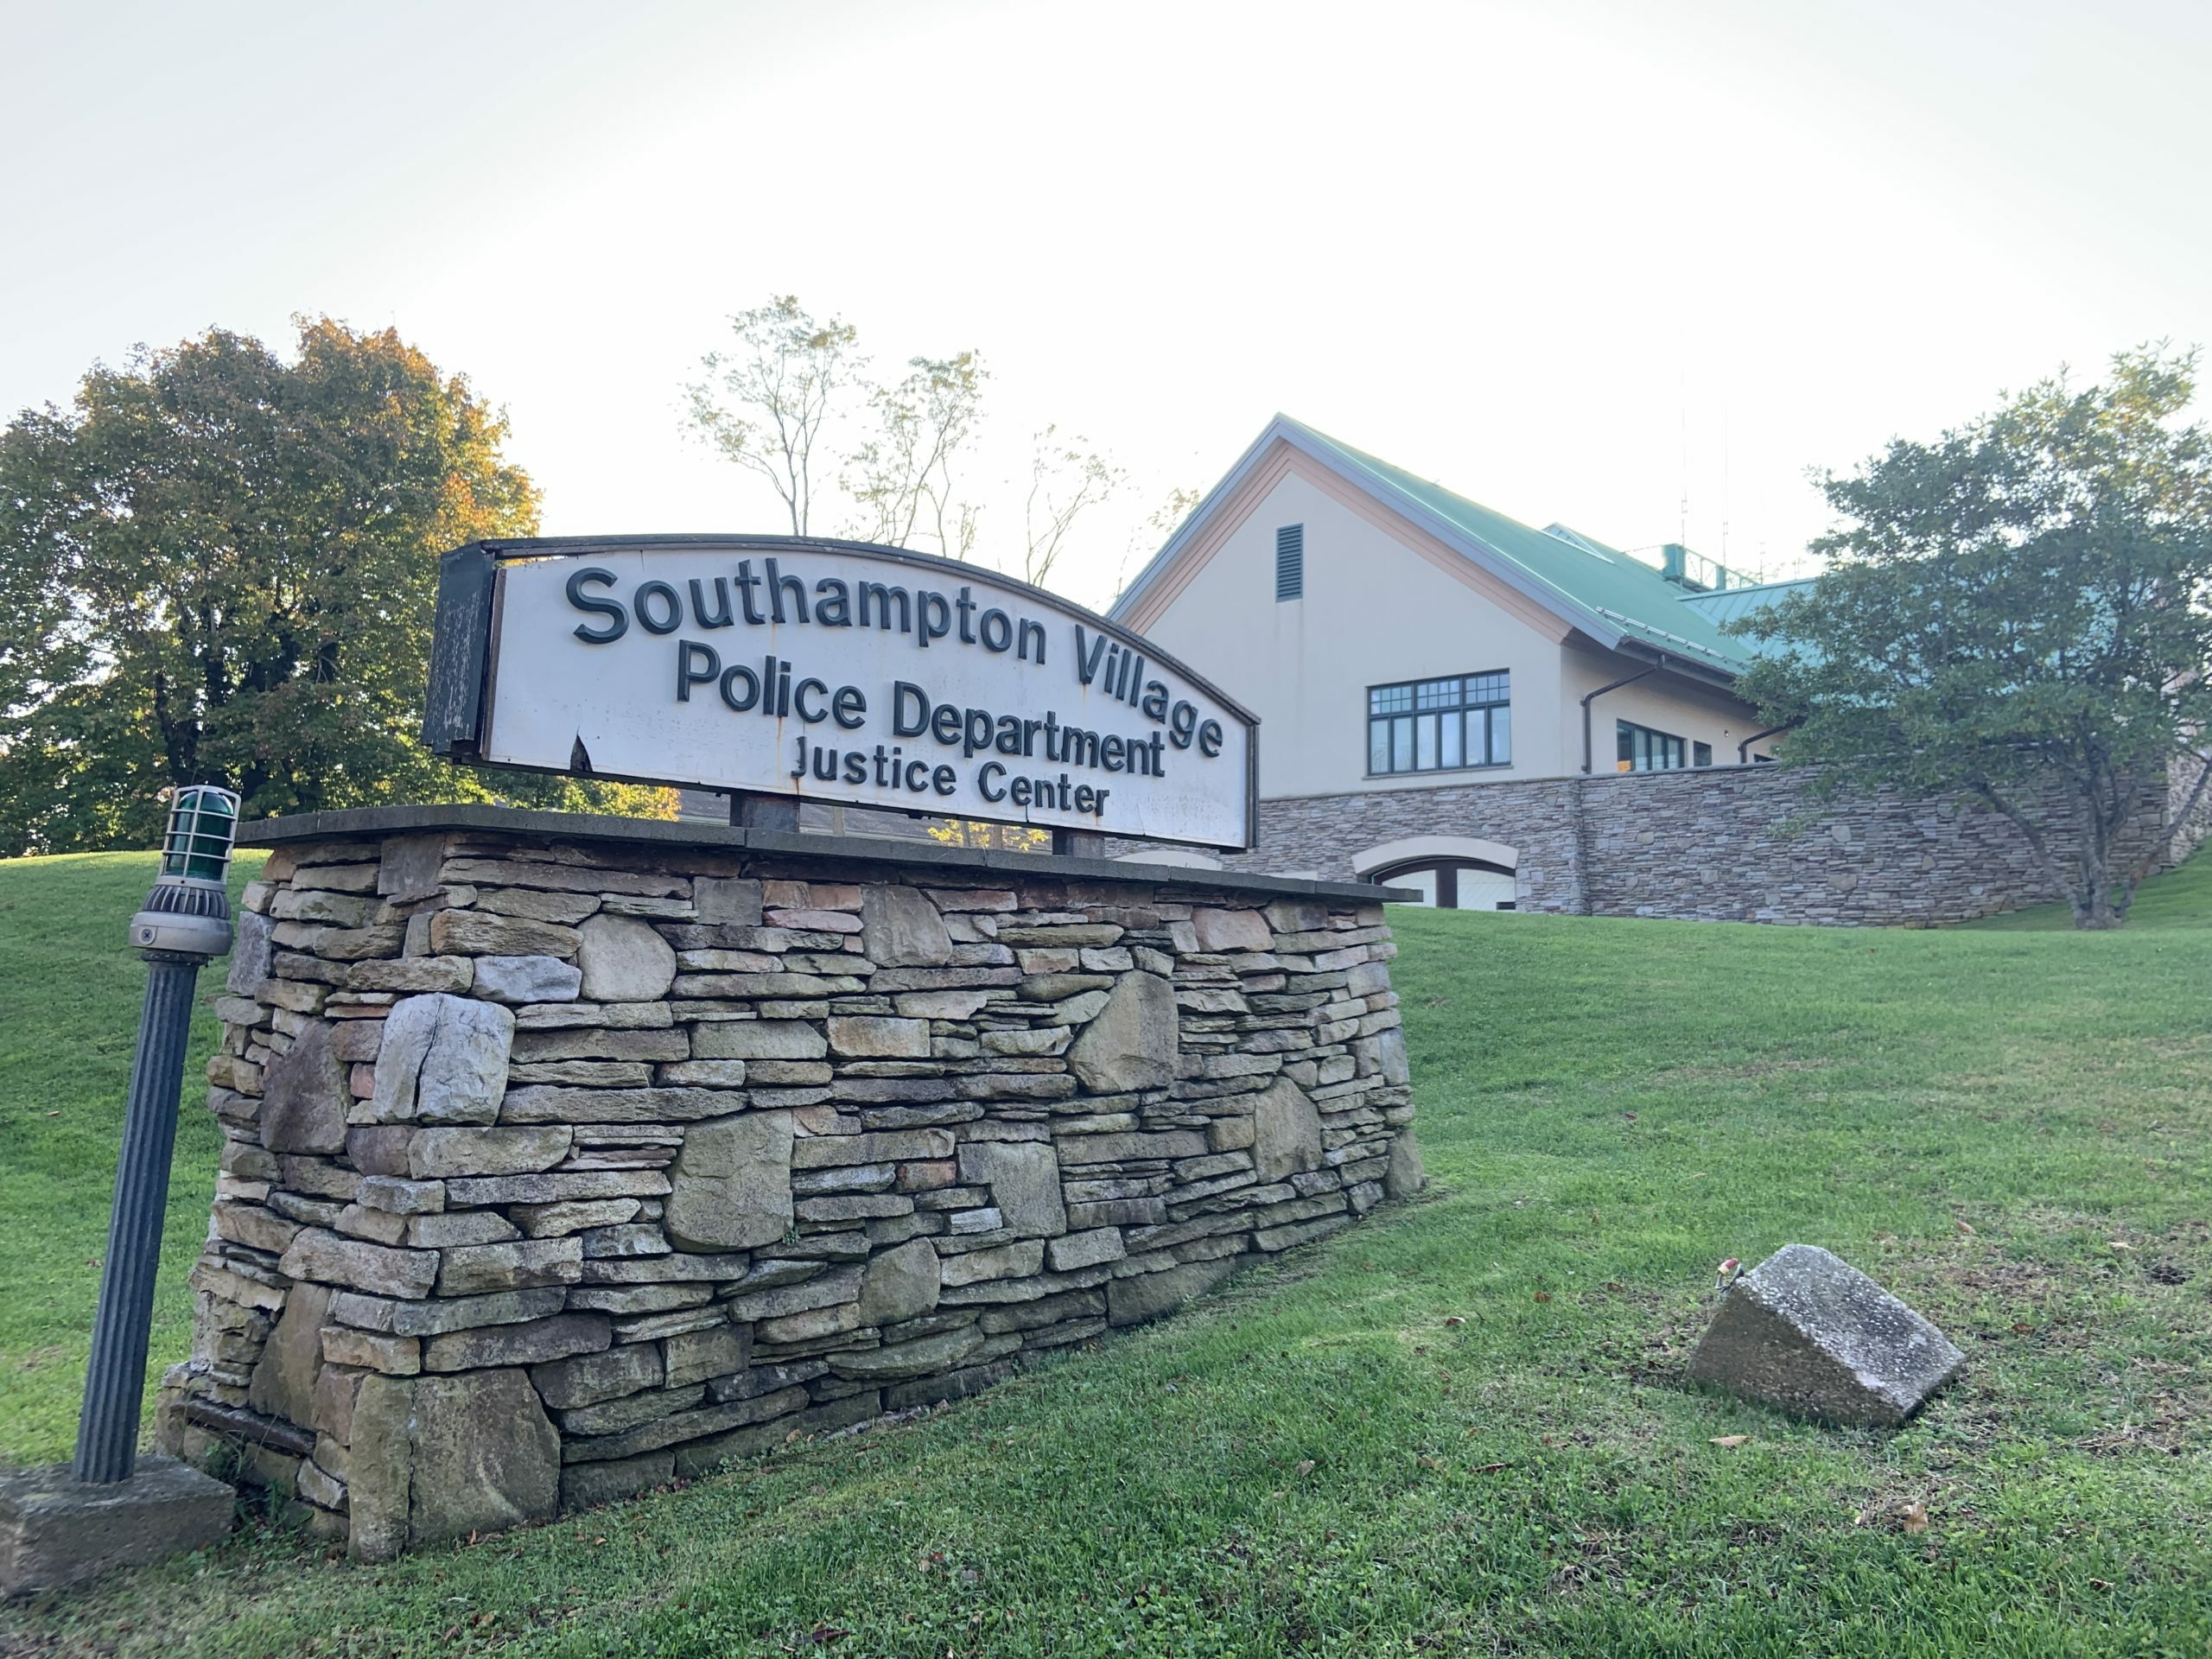 Police Chief Exams Will Be Administered for Southampton Village Next